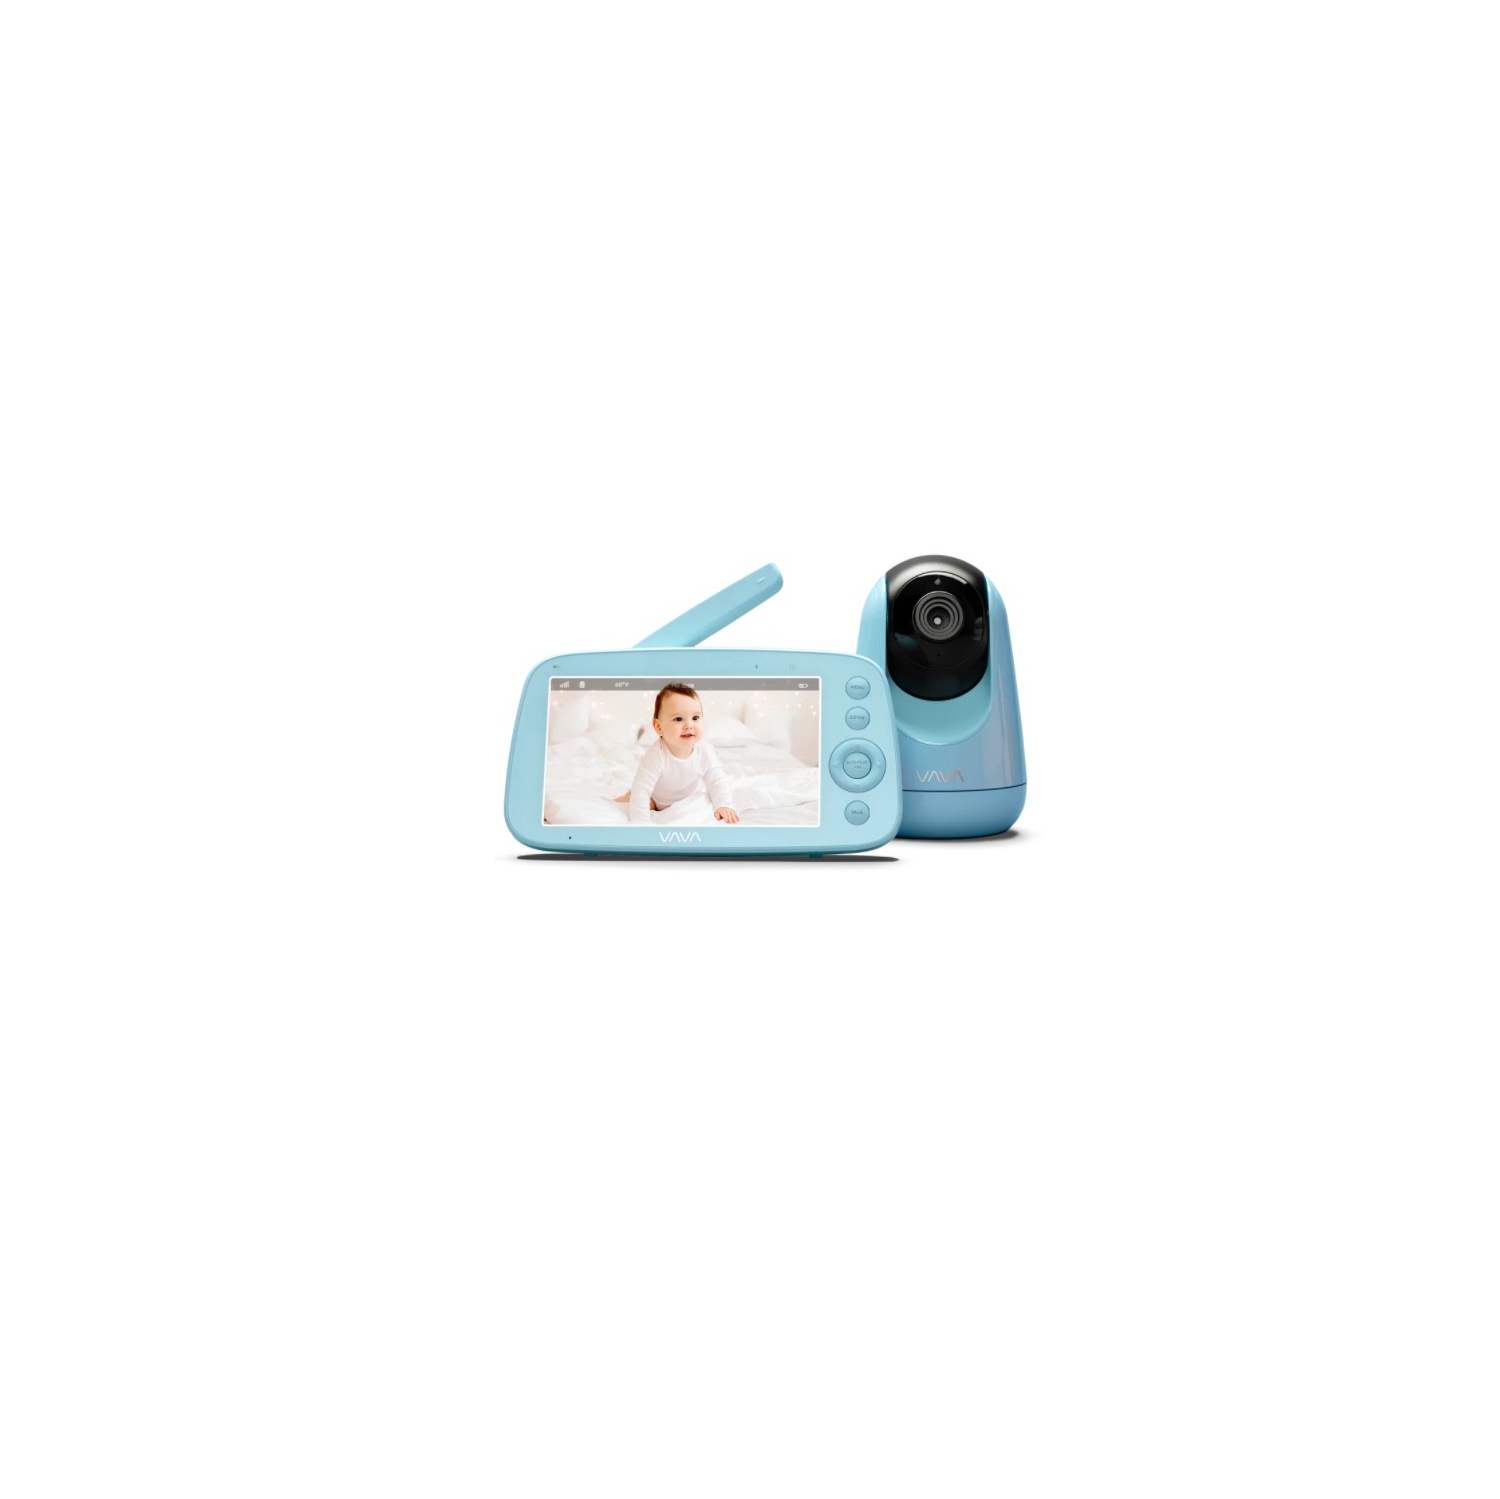 VAVA Video Baby Monitor with 720P Handheld Screen and 2-Way Audio, Infrared Night Vision - Blue